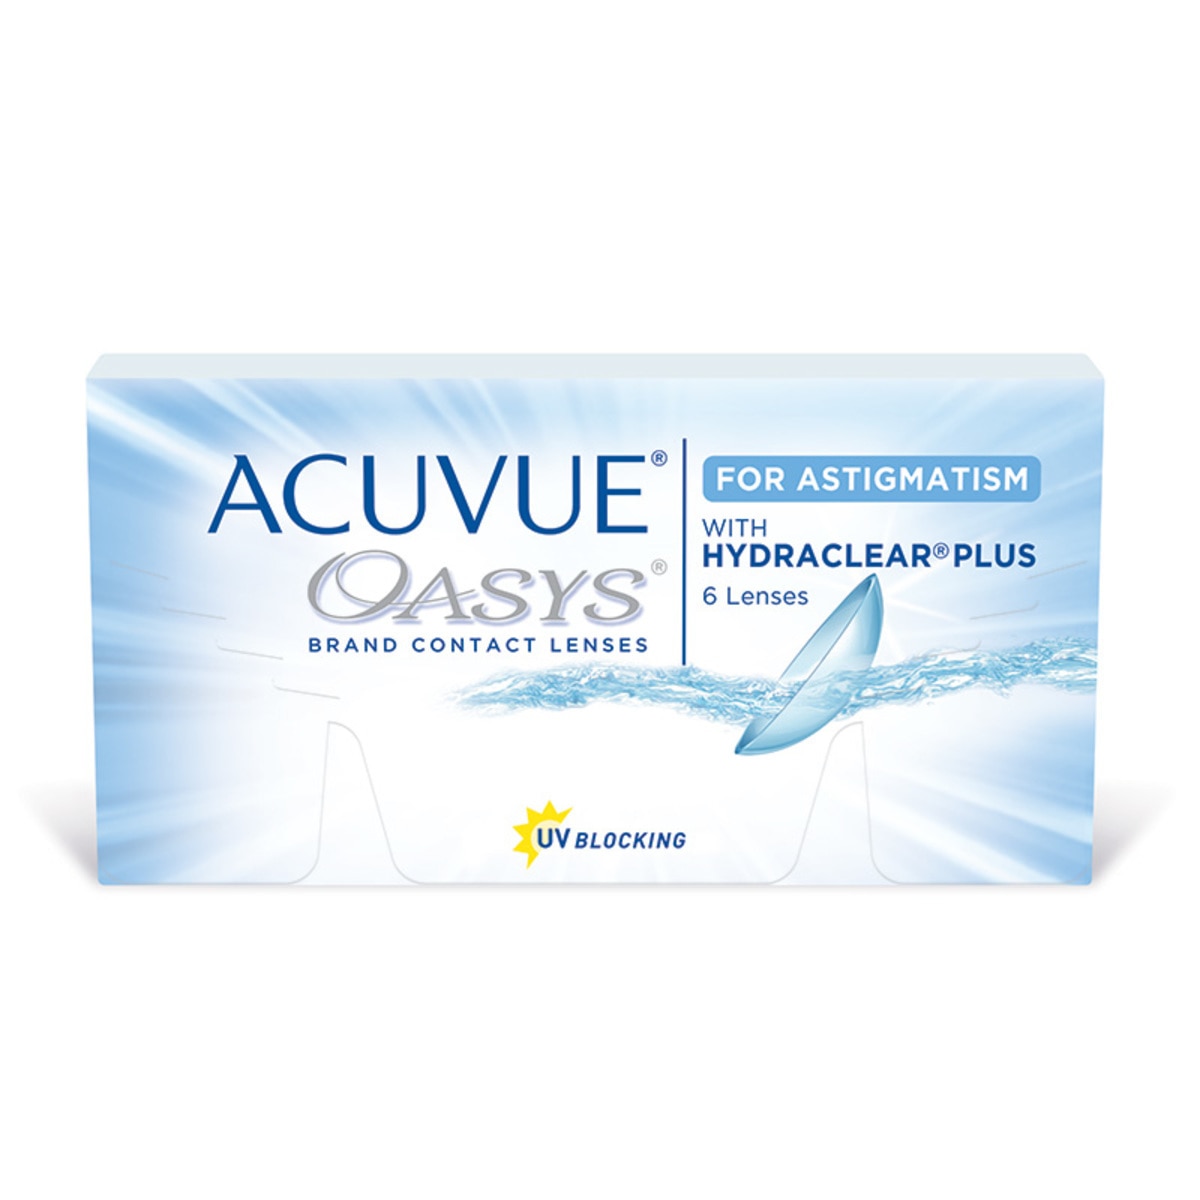 ACUVUE OASYS® con HYDRACLEAR Plus® para Astigmatismo (D -3.5, Cyl/Axis -2.25/170)